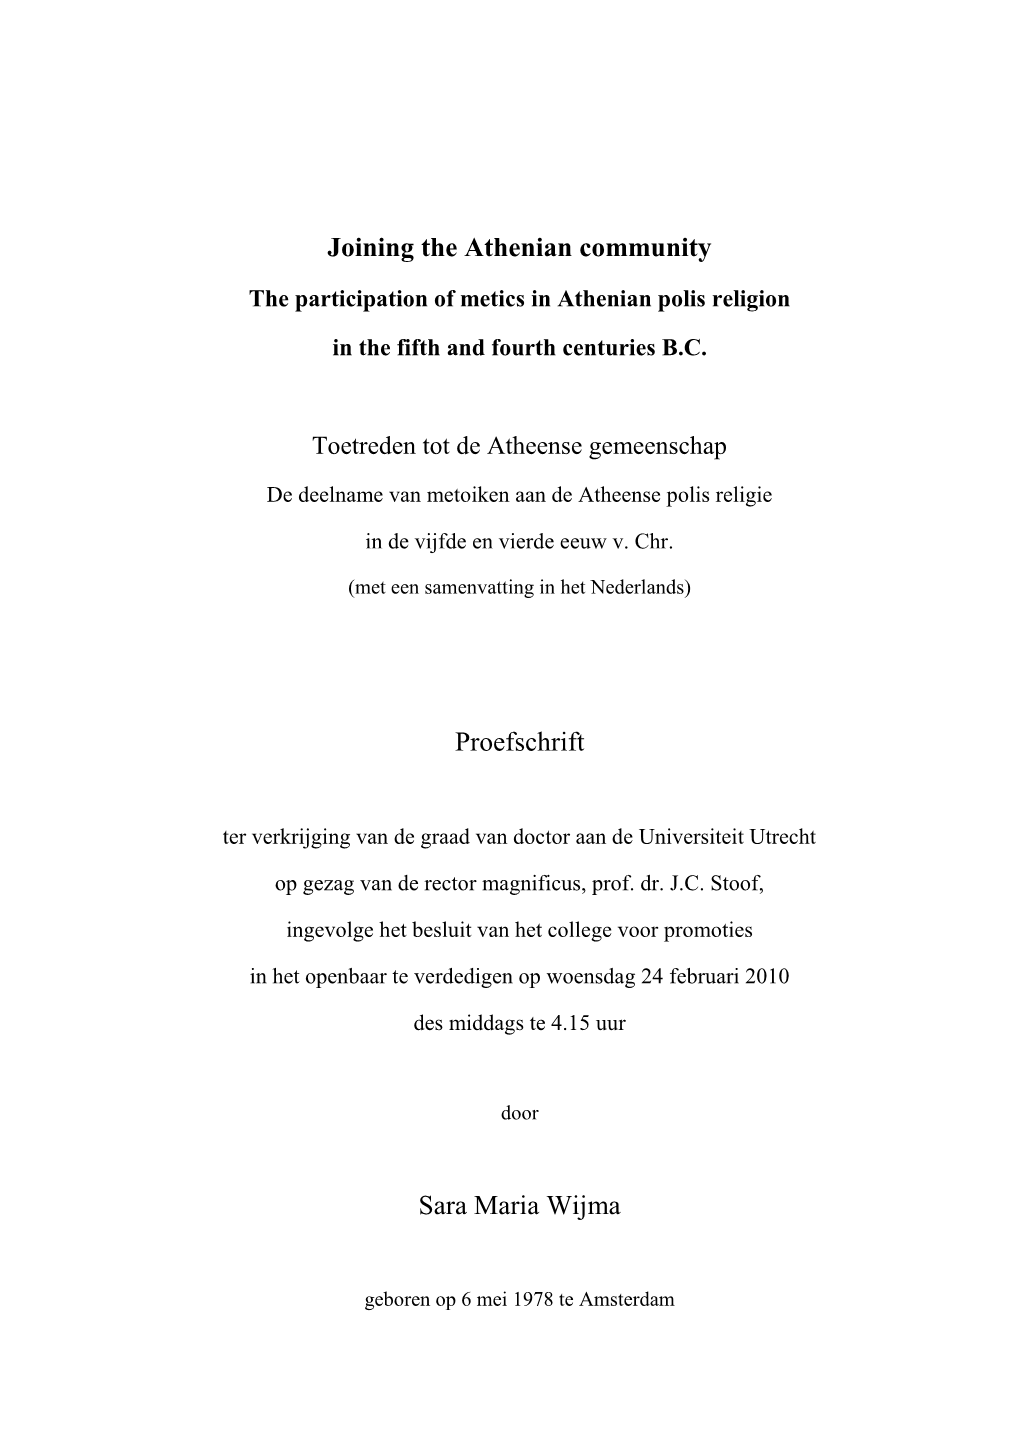 Joining the Athenian Community Proefschrift Sara Maria Wijma